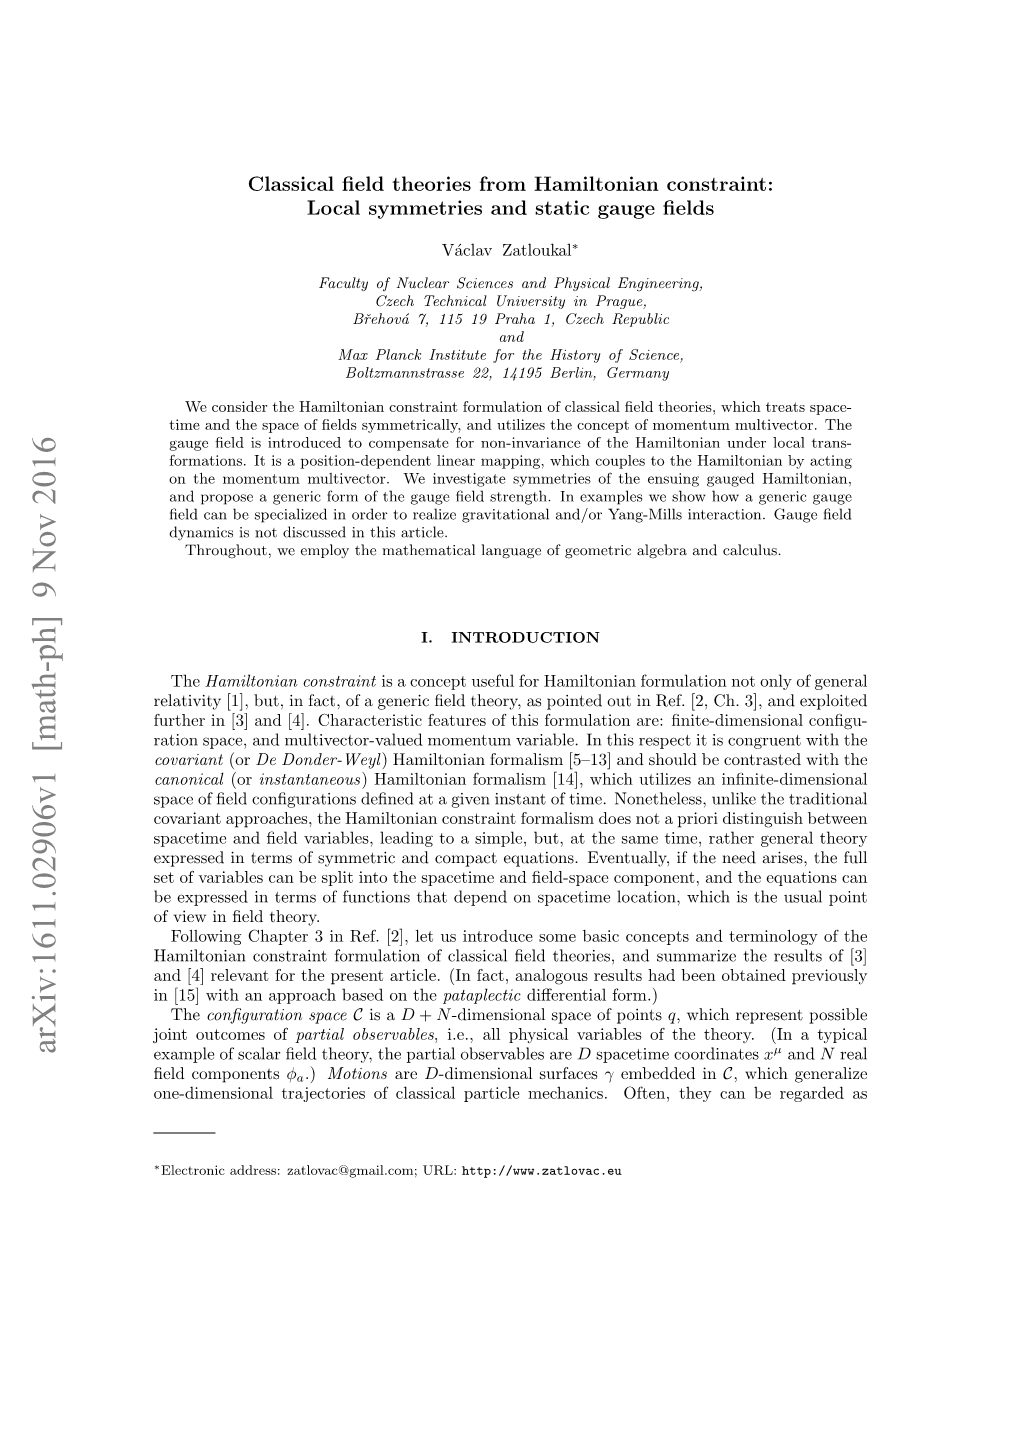 Classical Field Theories from Hamiltonian Constraint: Local